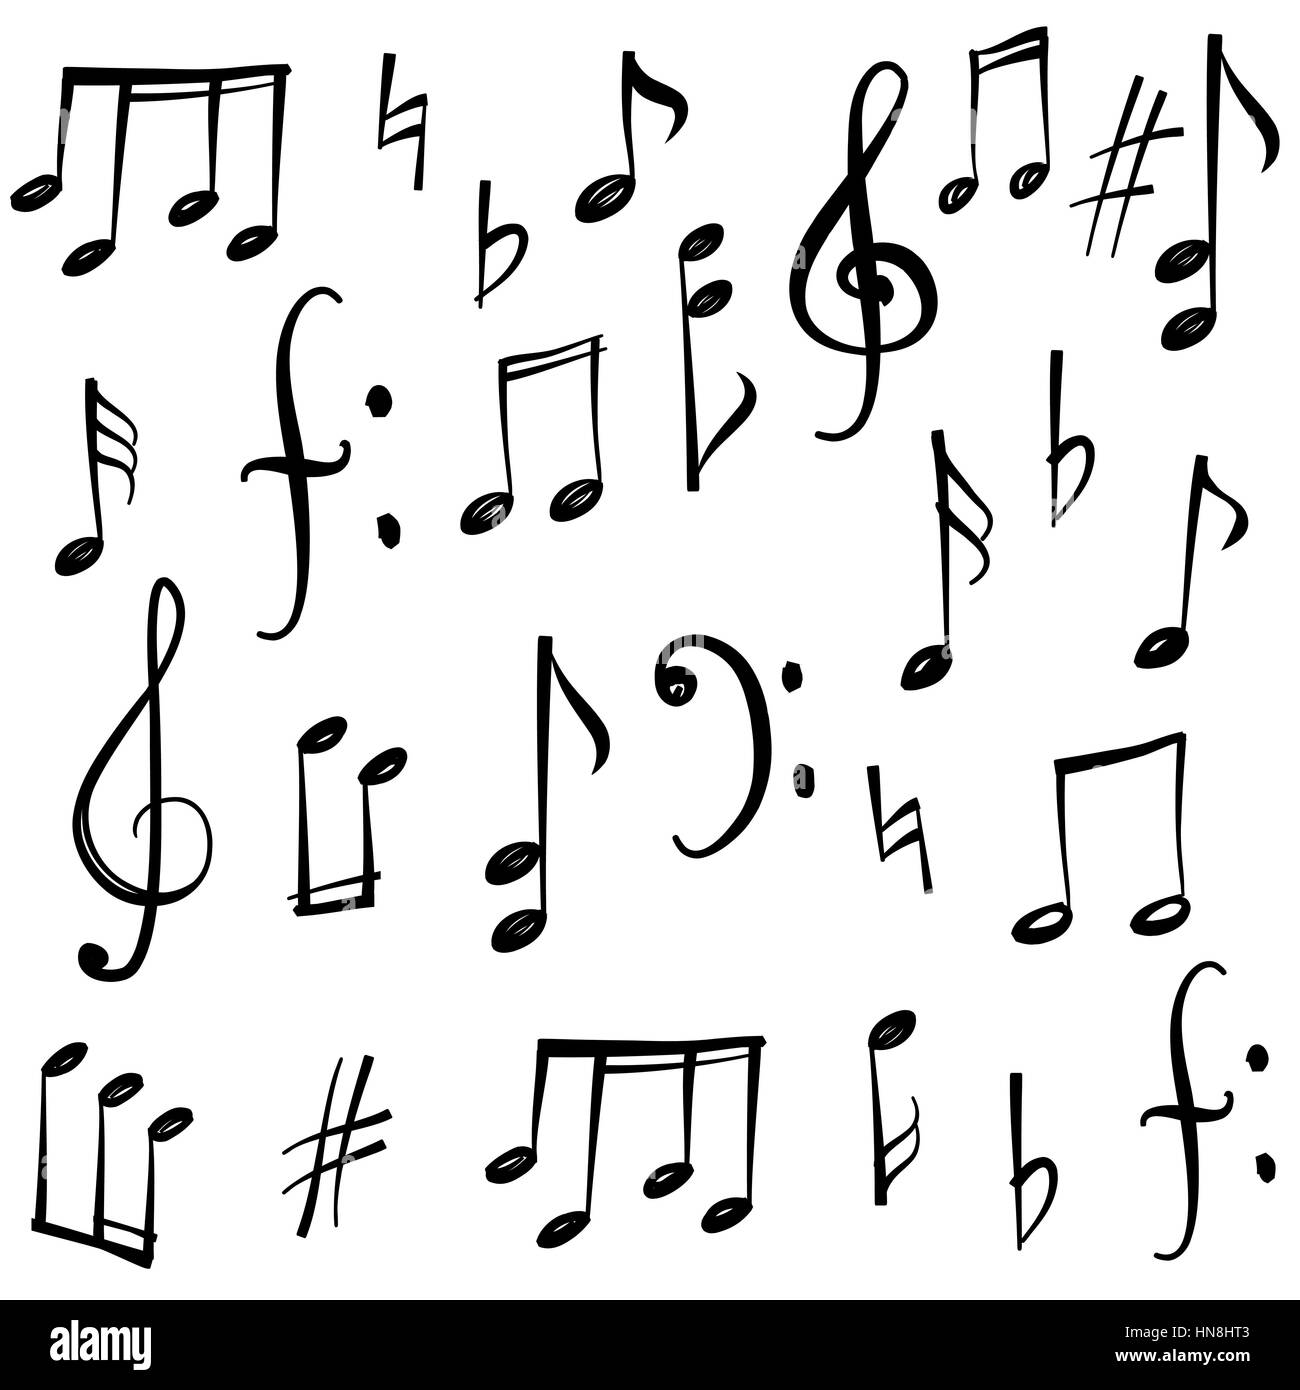 1,474 Music Notes Draw Stock Video Footage - 4K and HD Video Clips |  Shutterstock